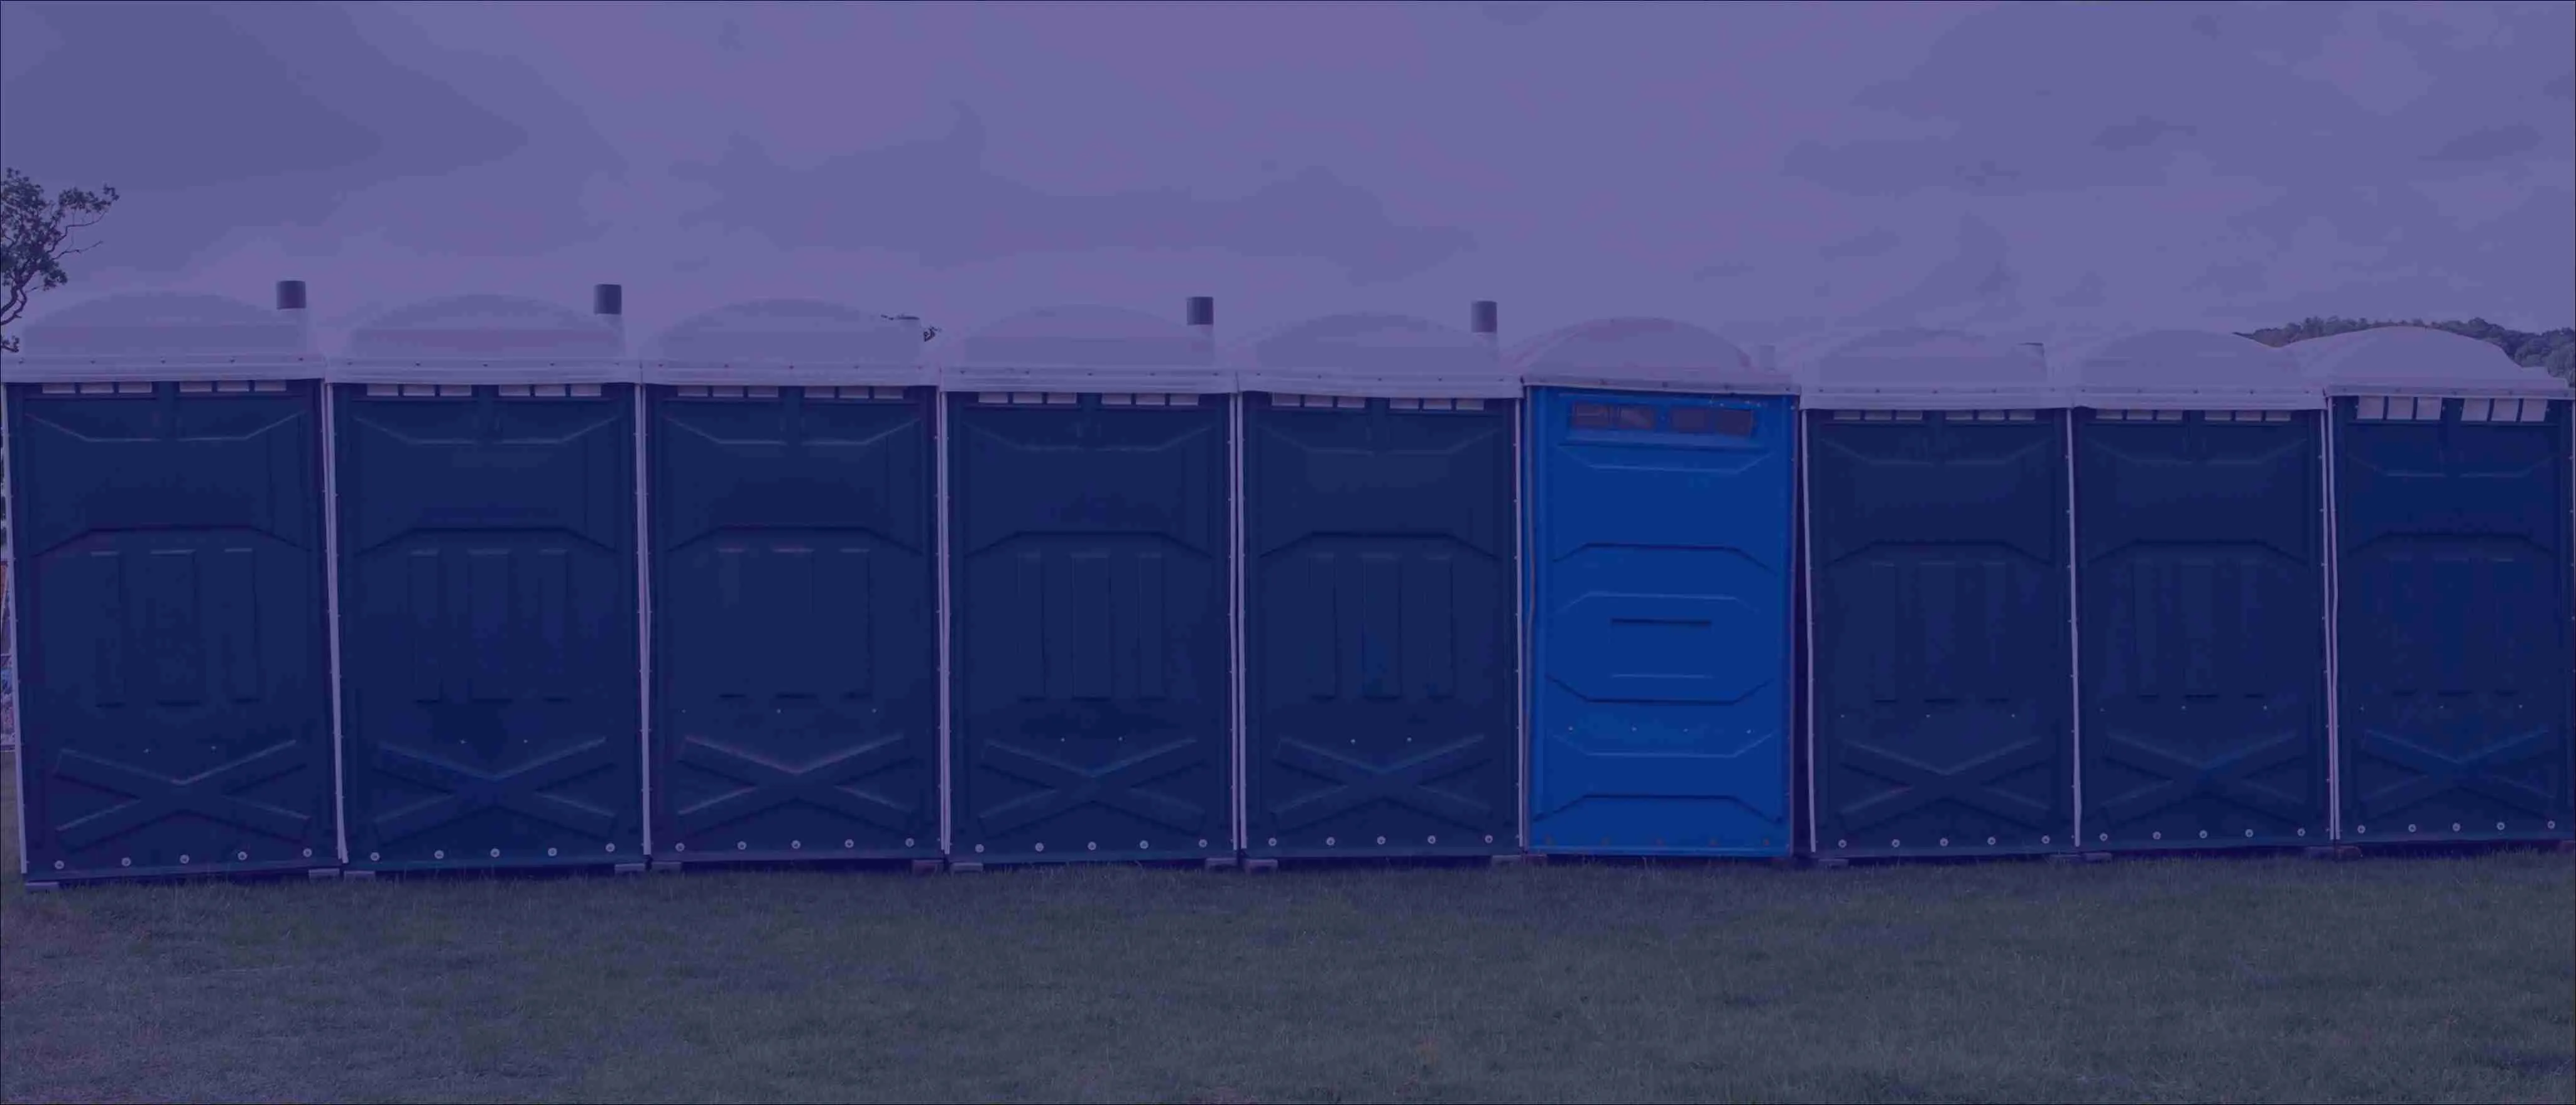 Portable toilet rental in New Jersey